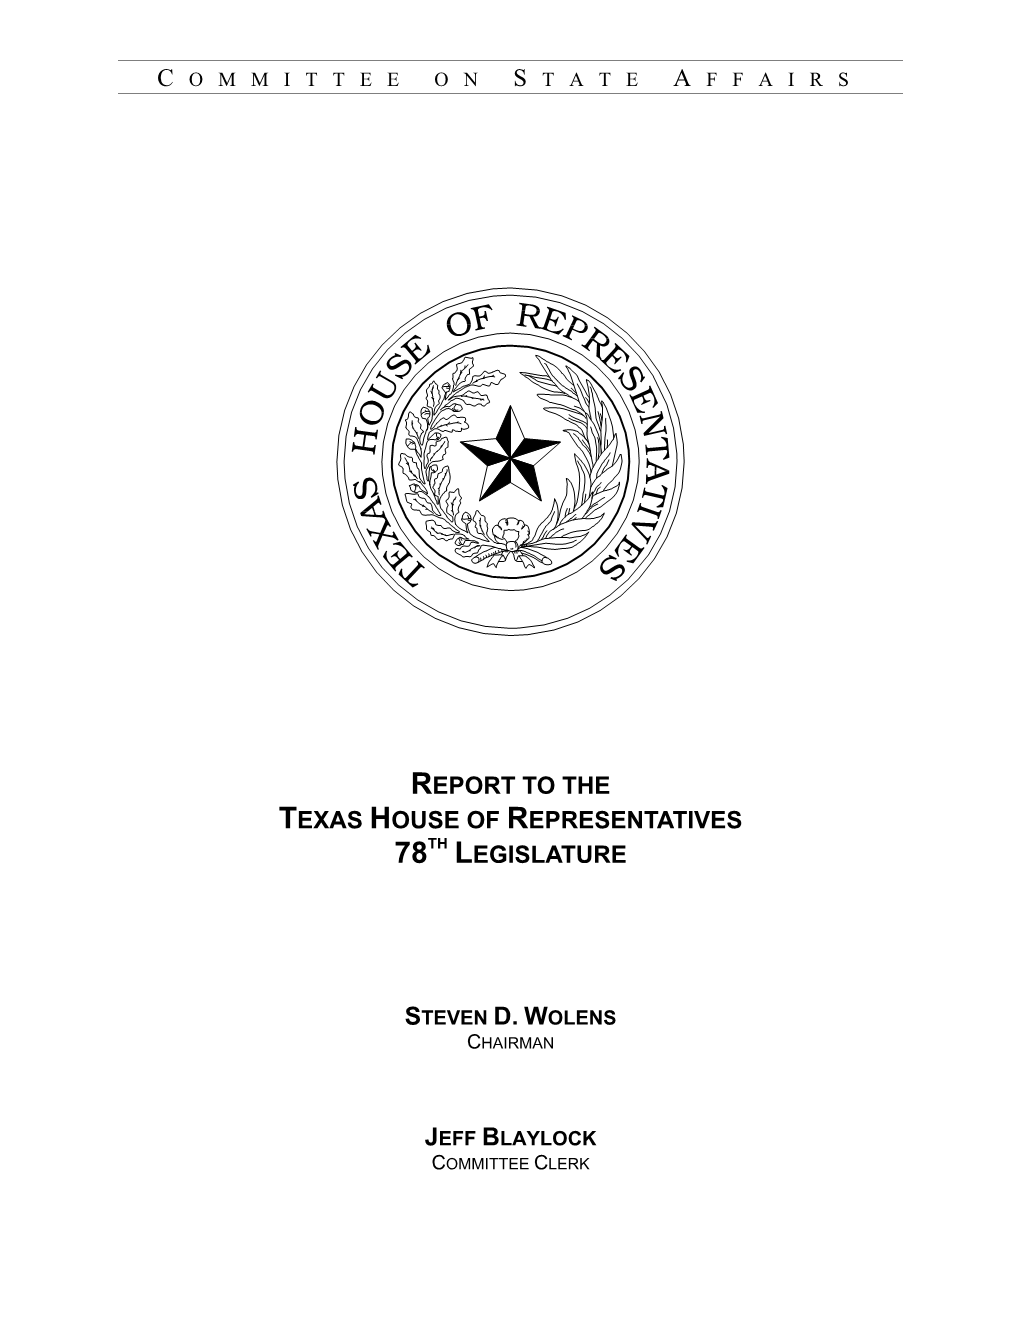 State Affairs of the 77Th Legislature Hereby Presents Its Interim Report for Consideration by the 78Th Legislature